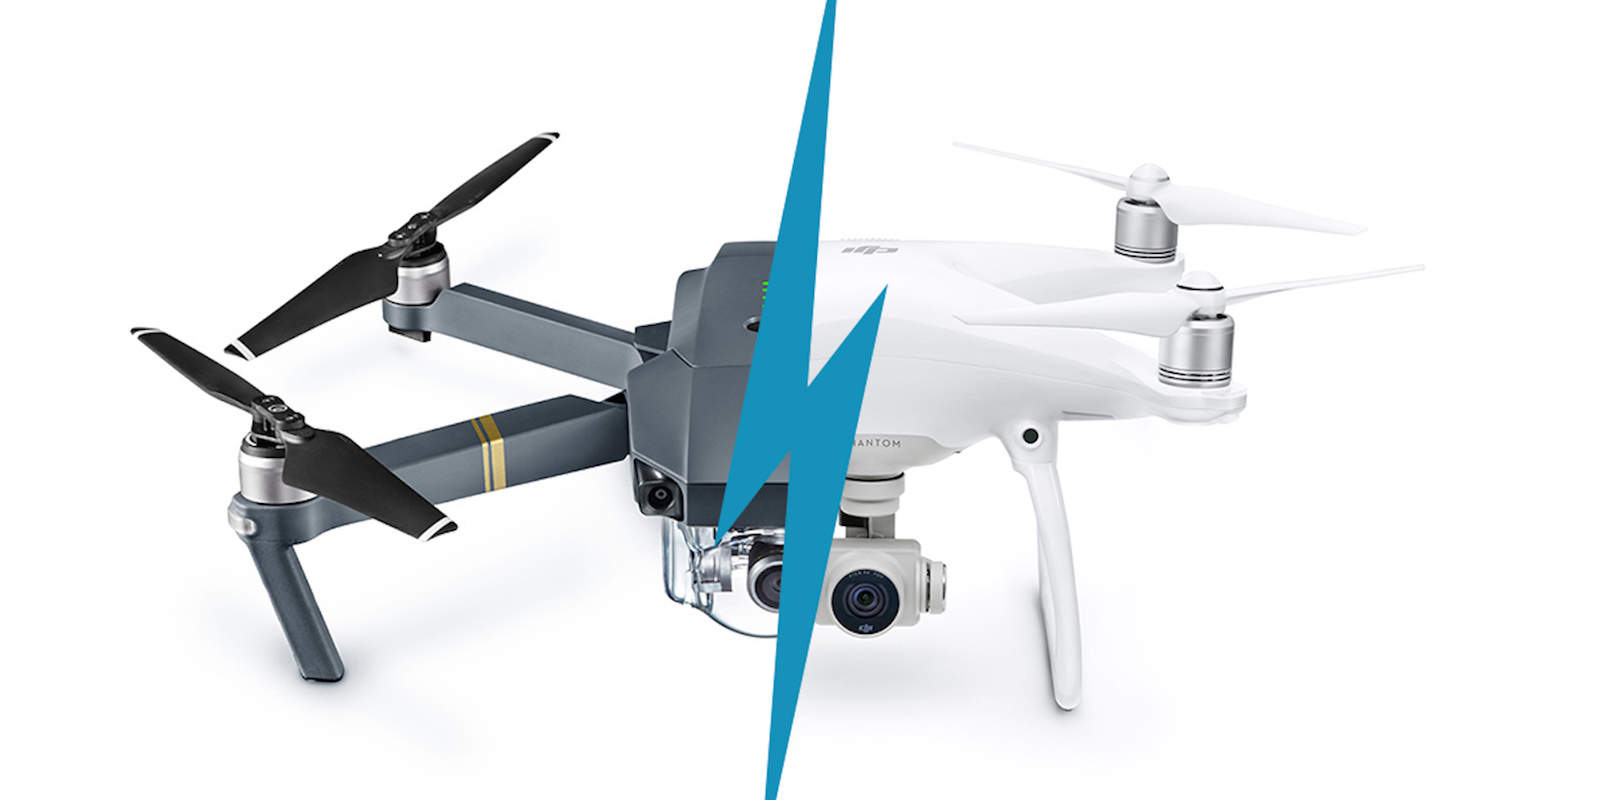 Enter to win one of two top shelf drones from DJI, the Phantom and the Mavic.